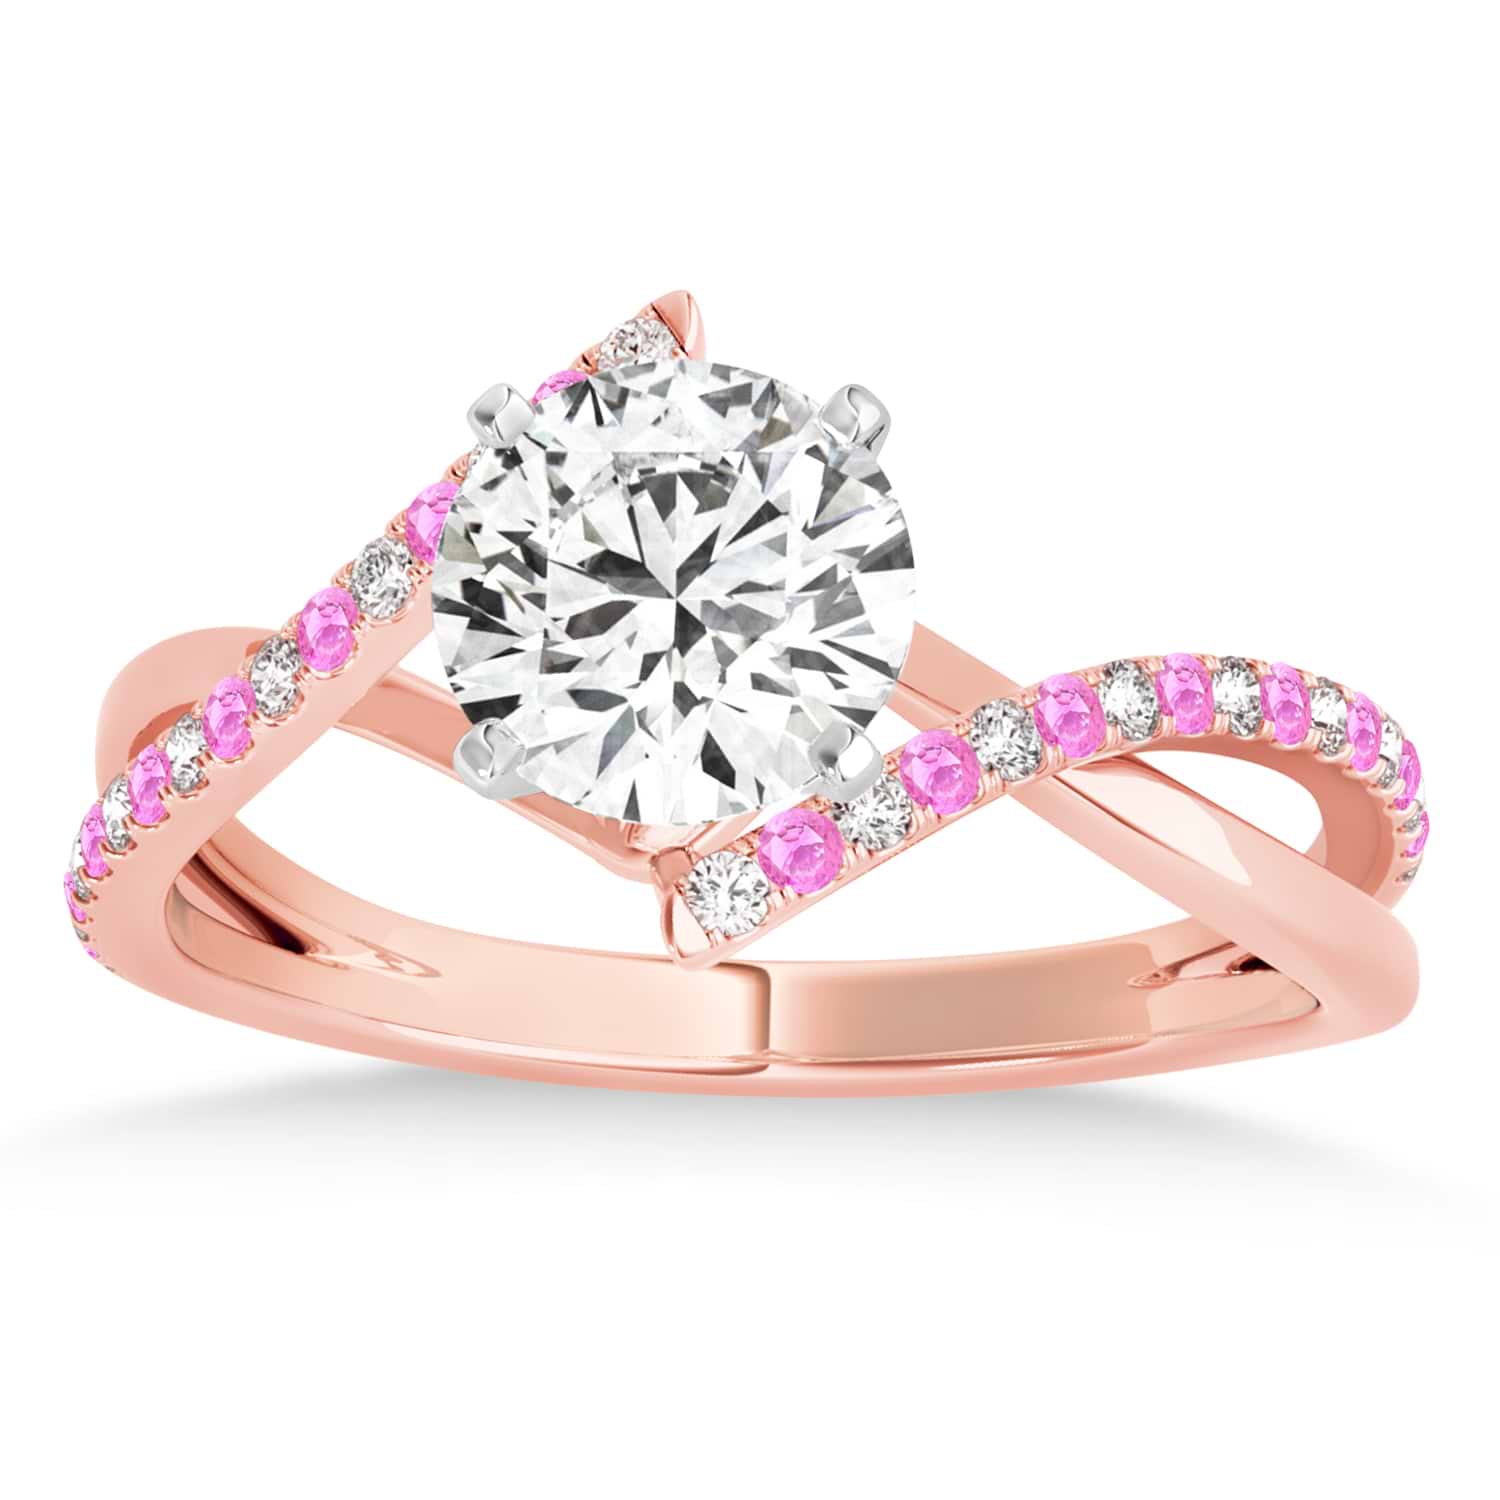 Diamond & Pink Sapphire Bypass Semi-Mount Ring in 14k Rose Gold (0.14ct)